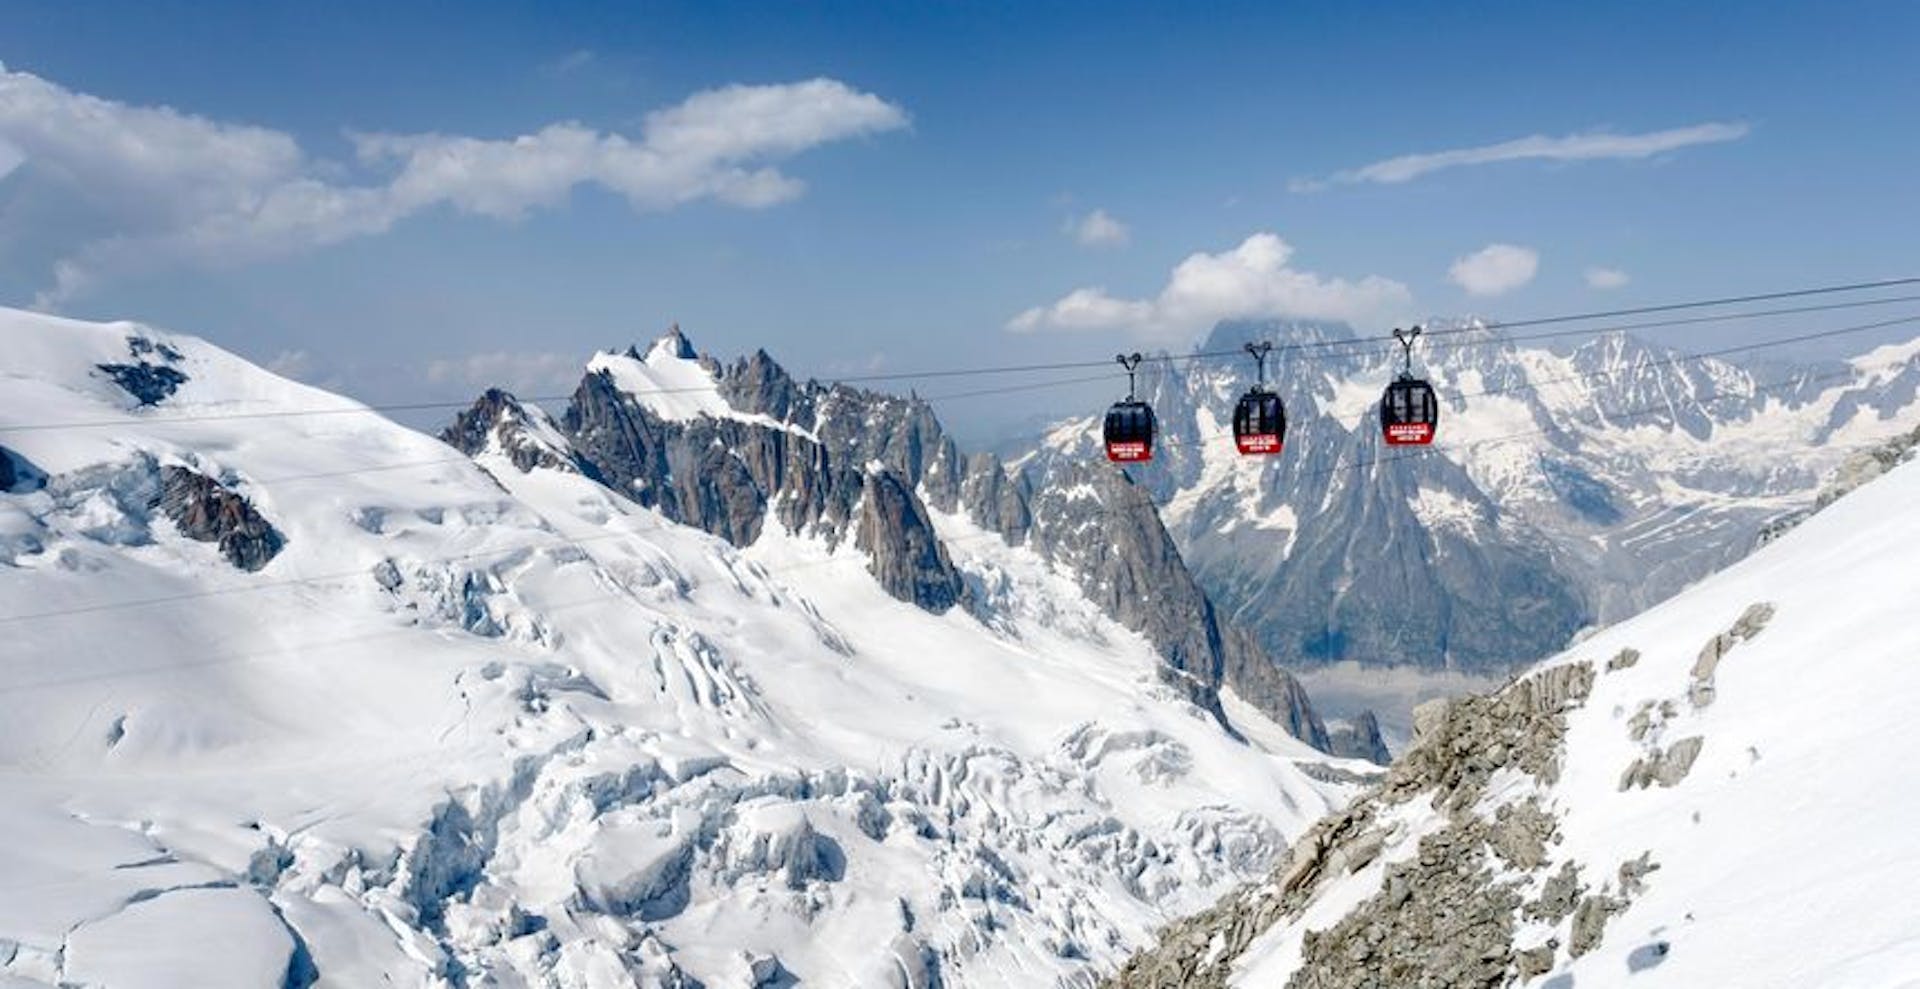 Advanced and expert skiers you don't want to miss on Chamonix